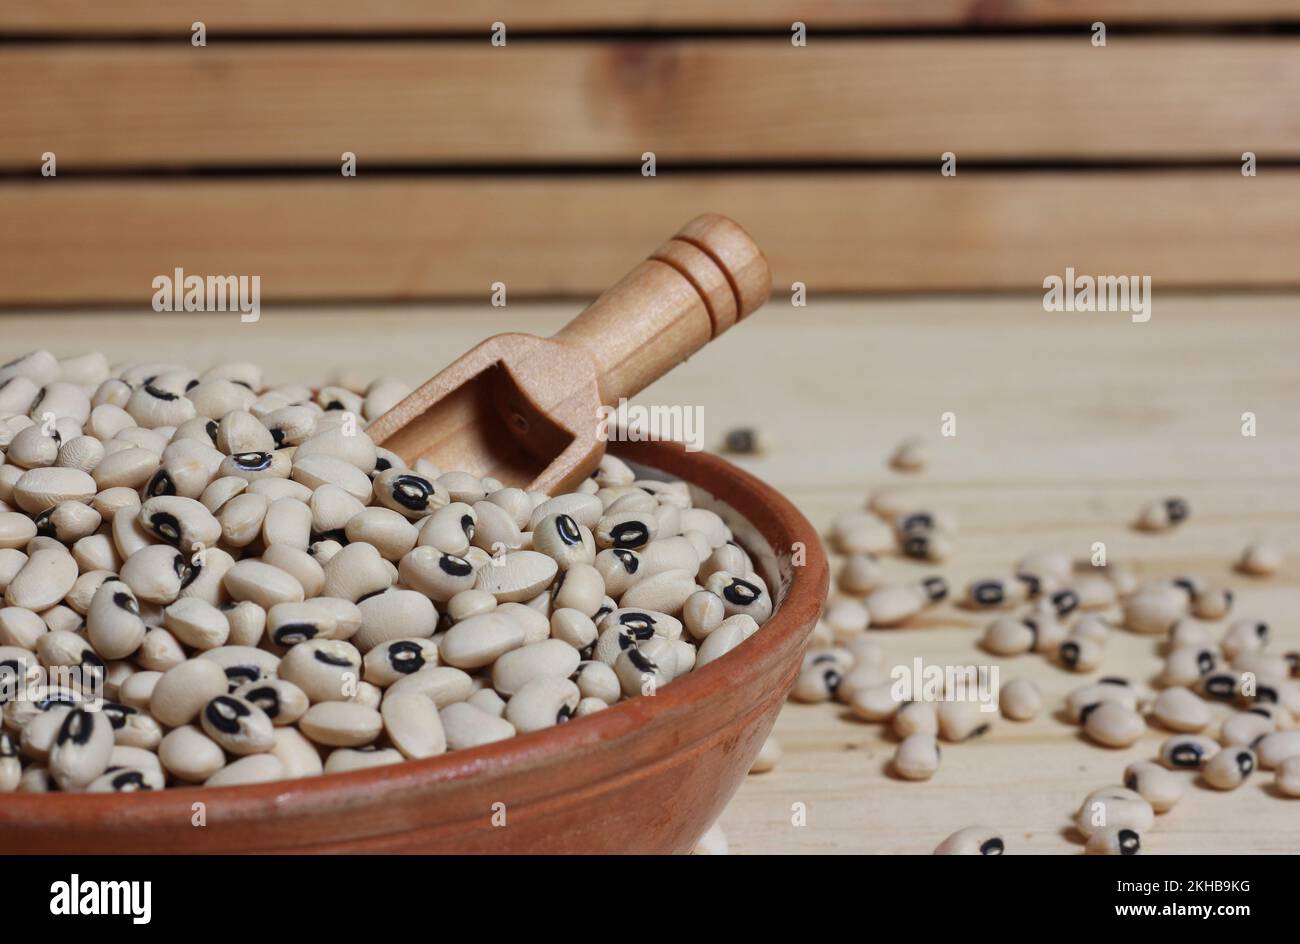 Uncooked Dried Black Eyed Peas in Bowl on Wooden Table Stock Photo